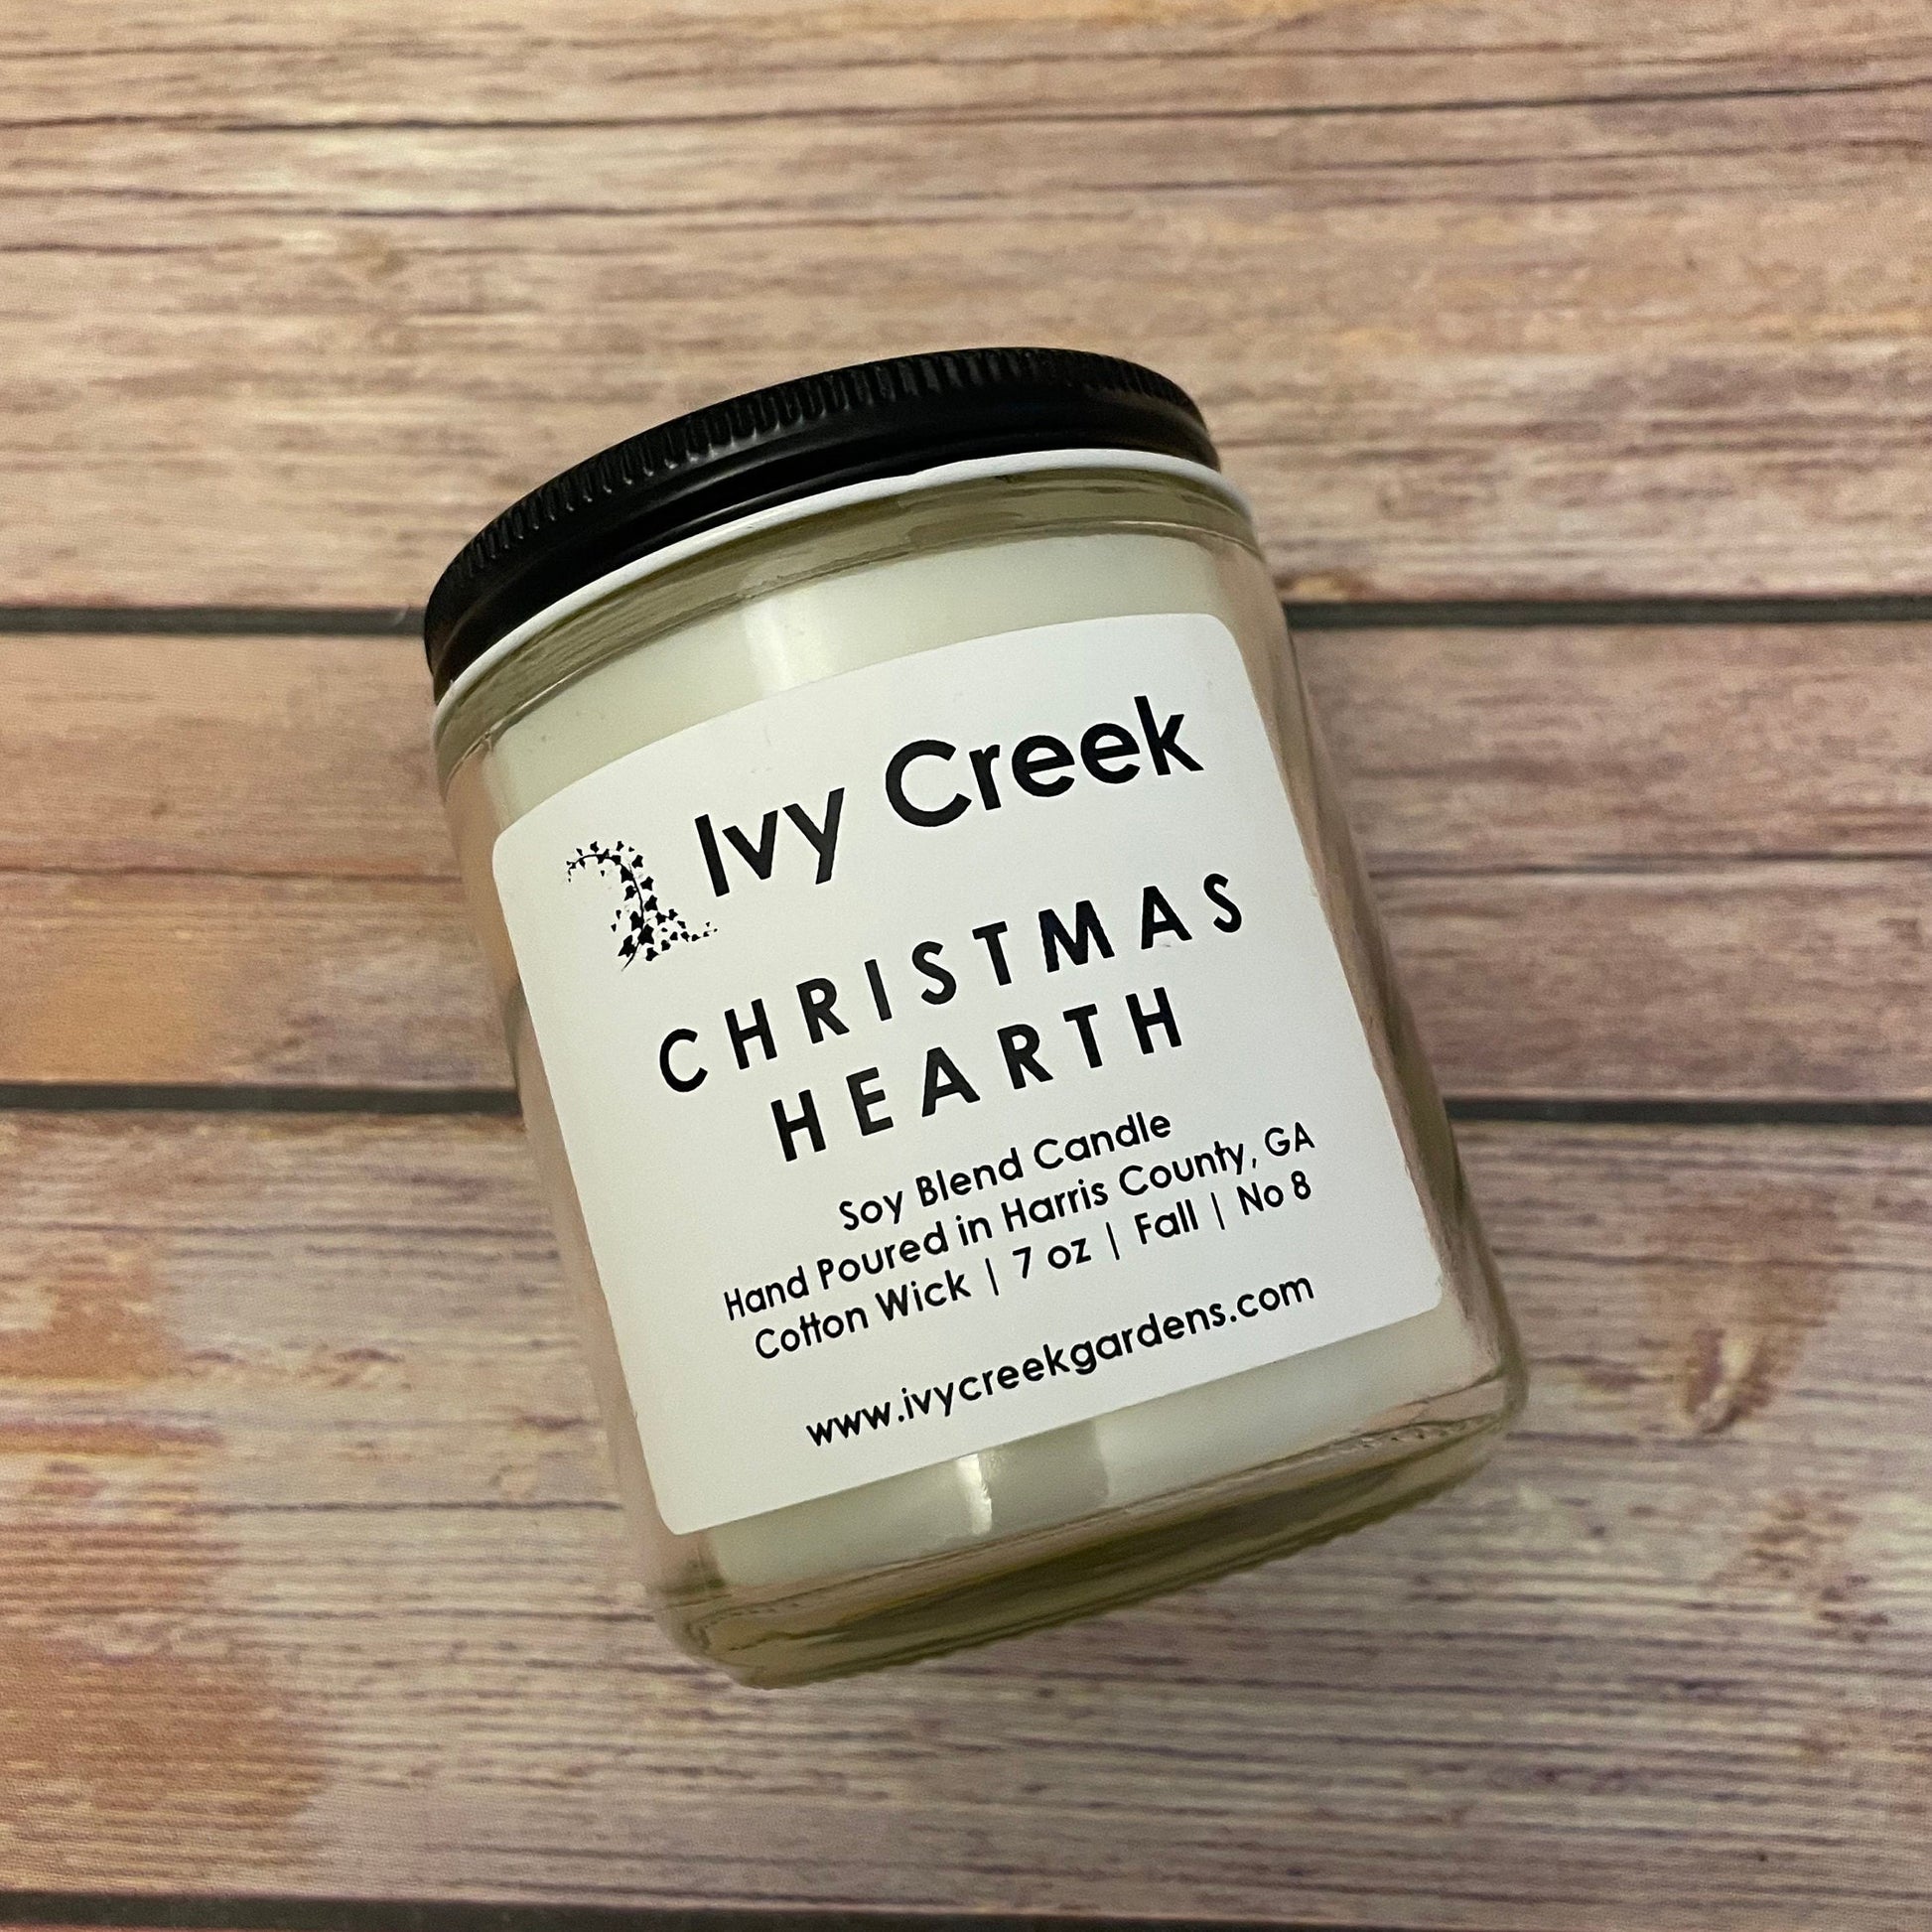 Ivy Creek No 8 | Christmas Hearth Soy Blend Candle | Hand Poured | 7 oz | Cotton Wick | Small Batch | Clean Burning | Container Candle